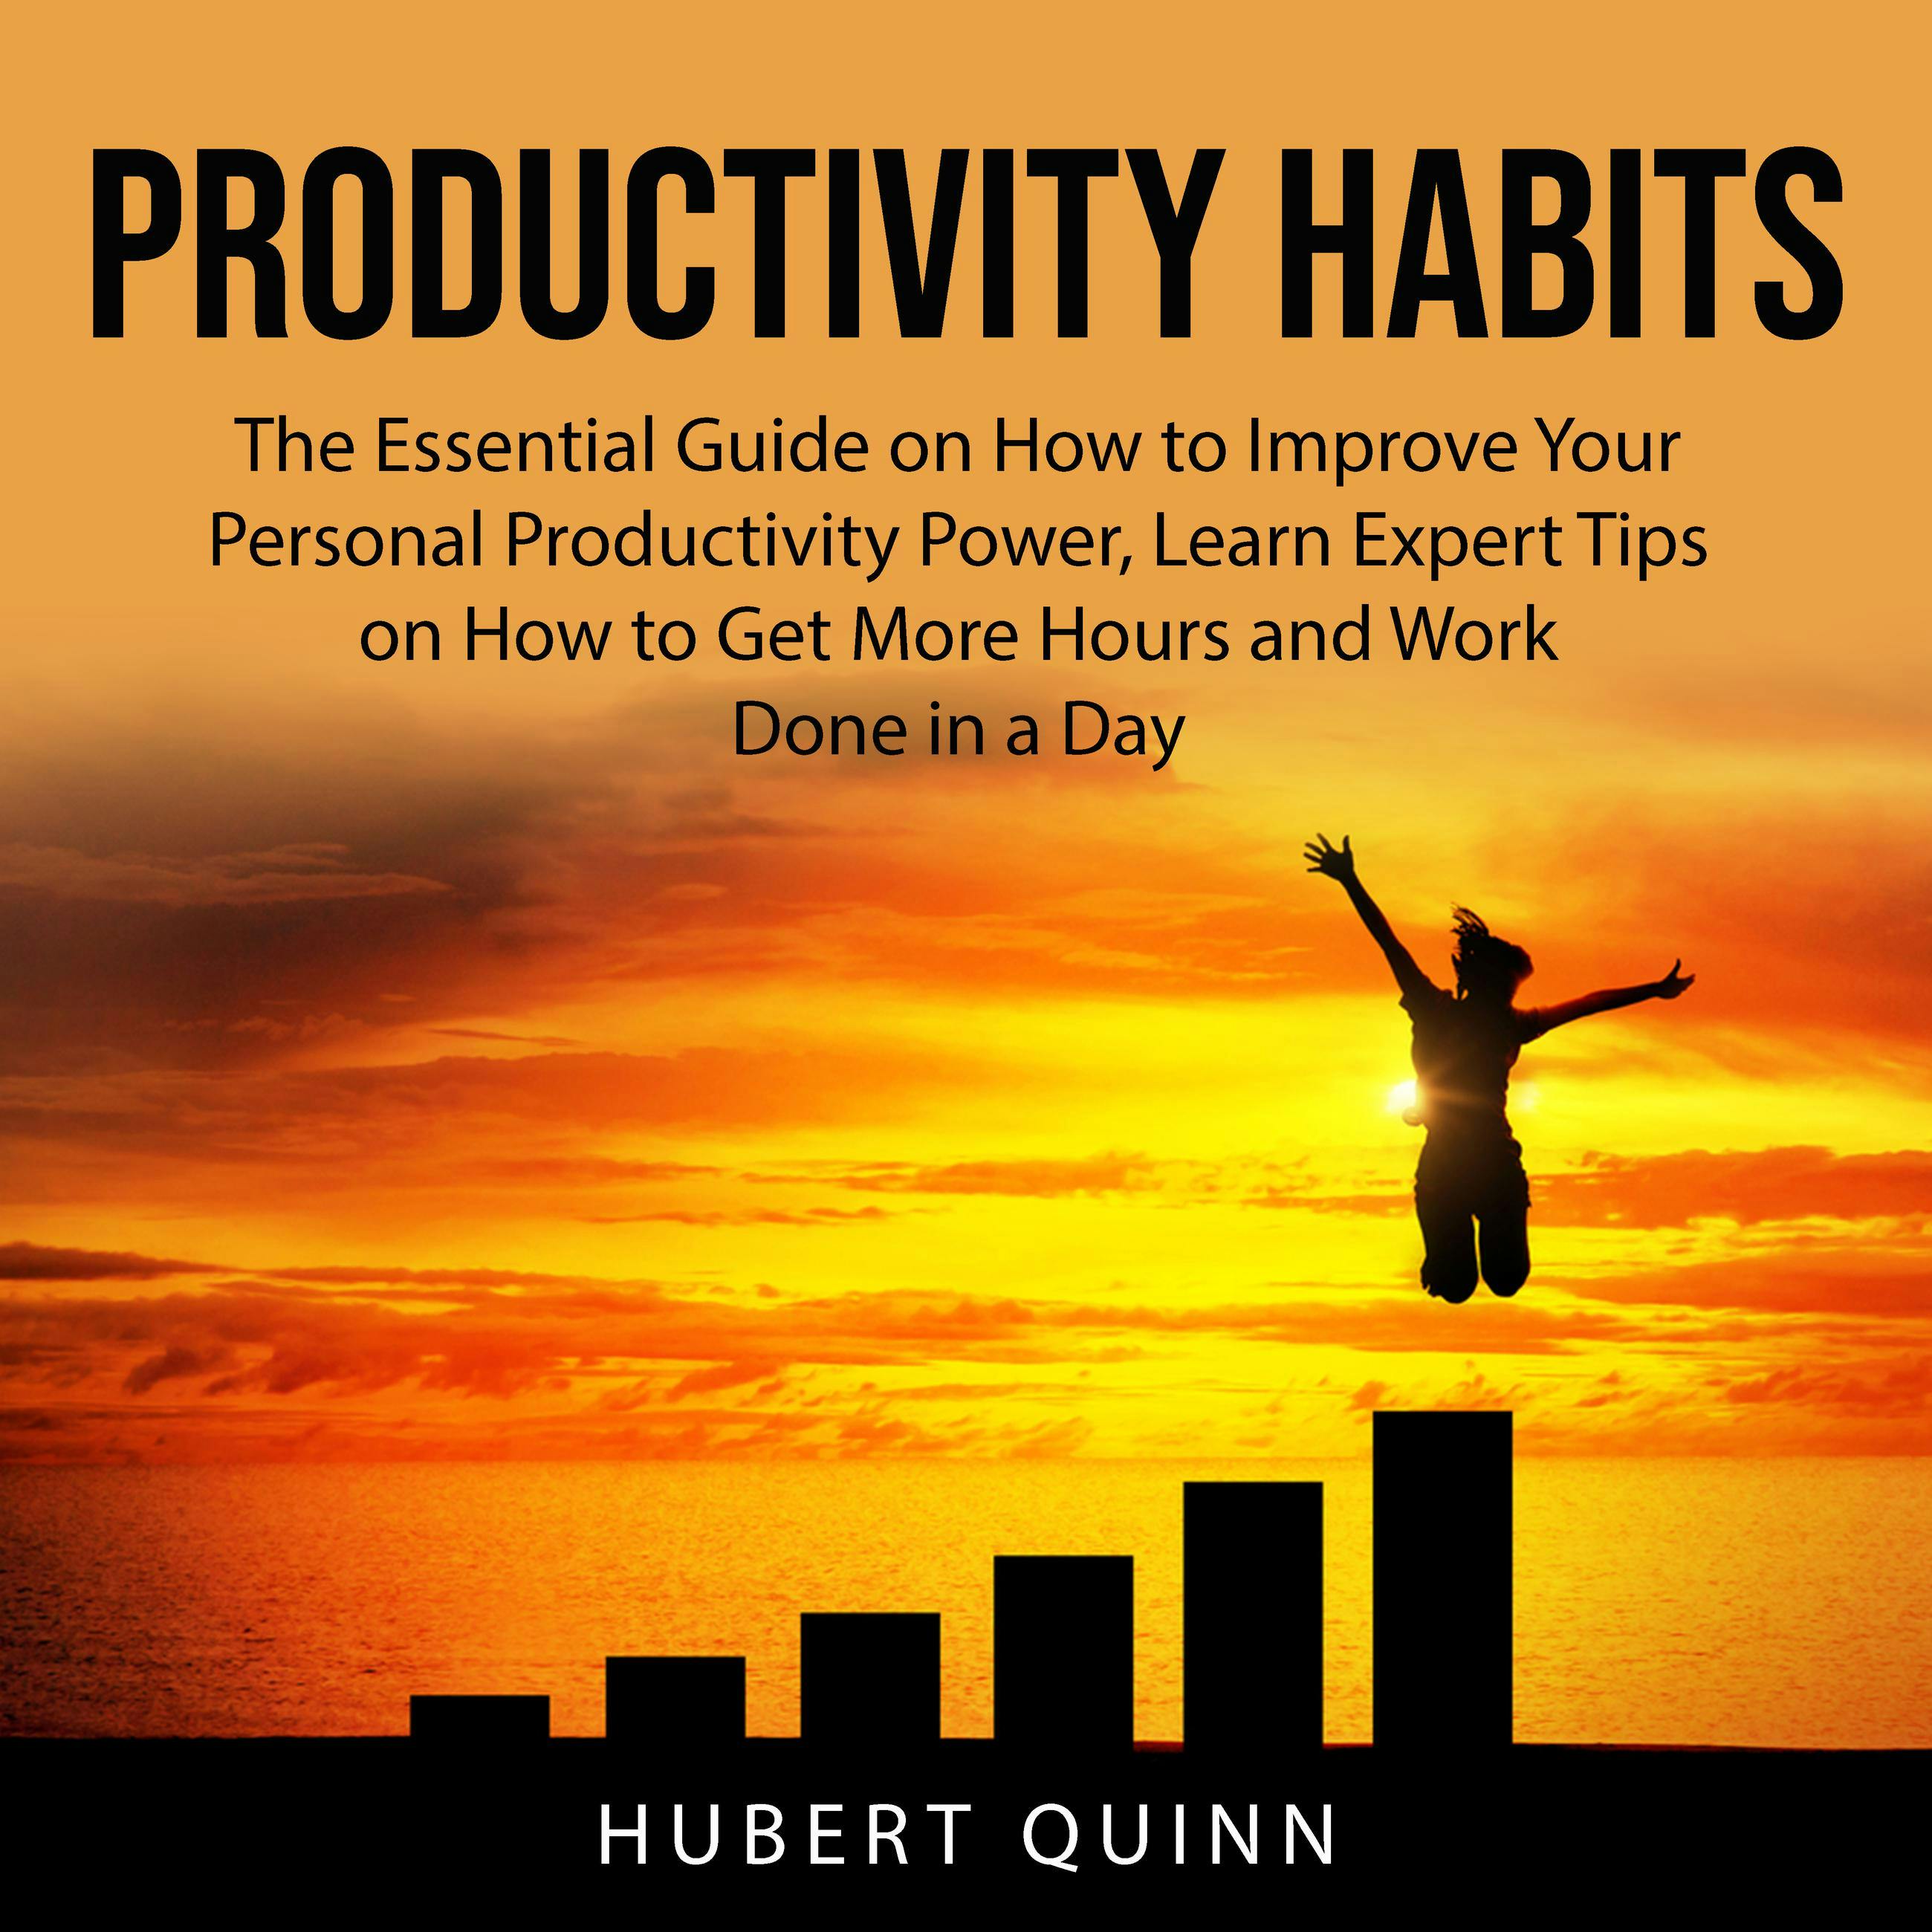 Productivity Habits: The Essential Guide on How to Improve Your Personal Productivity Power, Learn Expert Tips on How to Get More Hours and Work Done in a Day - Hubert Quinn